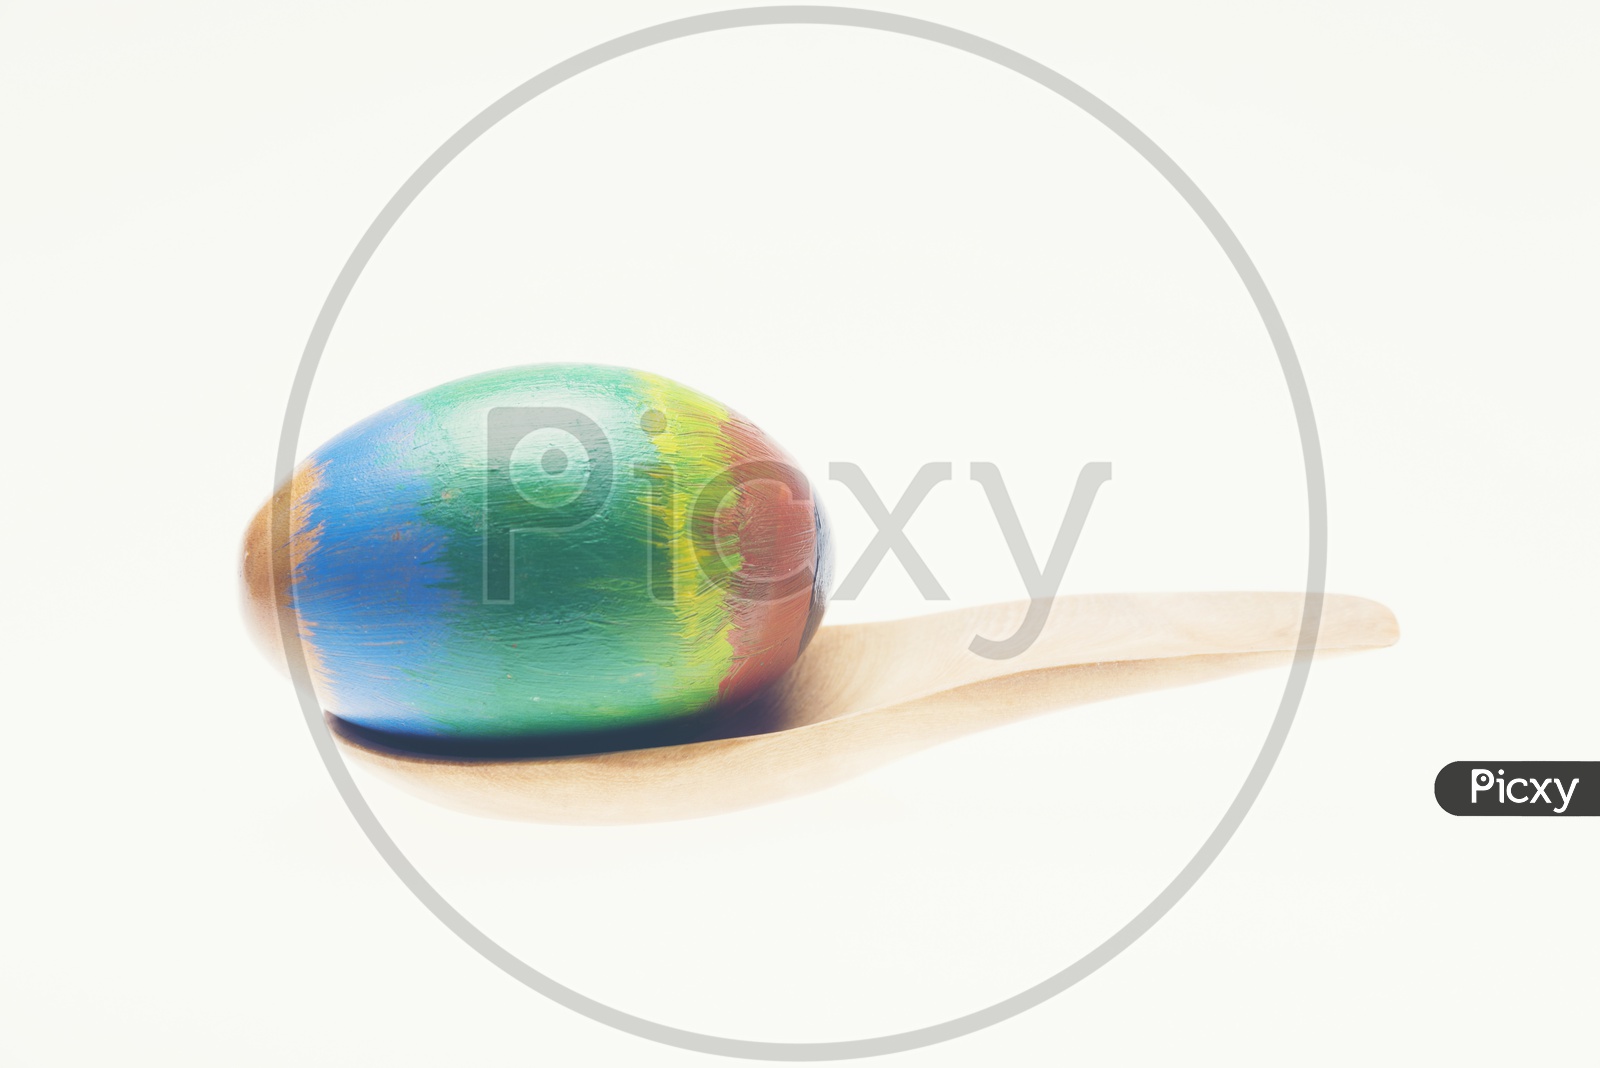 Colorful handmade easter eggs isolated on a white